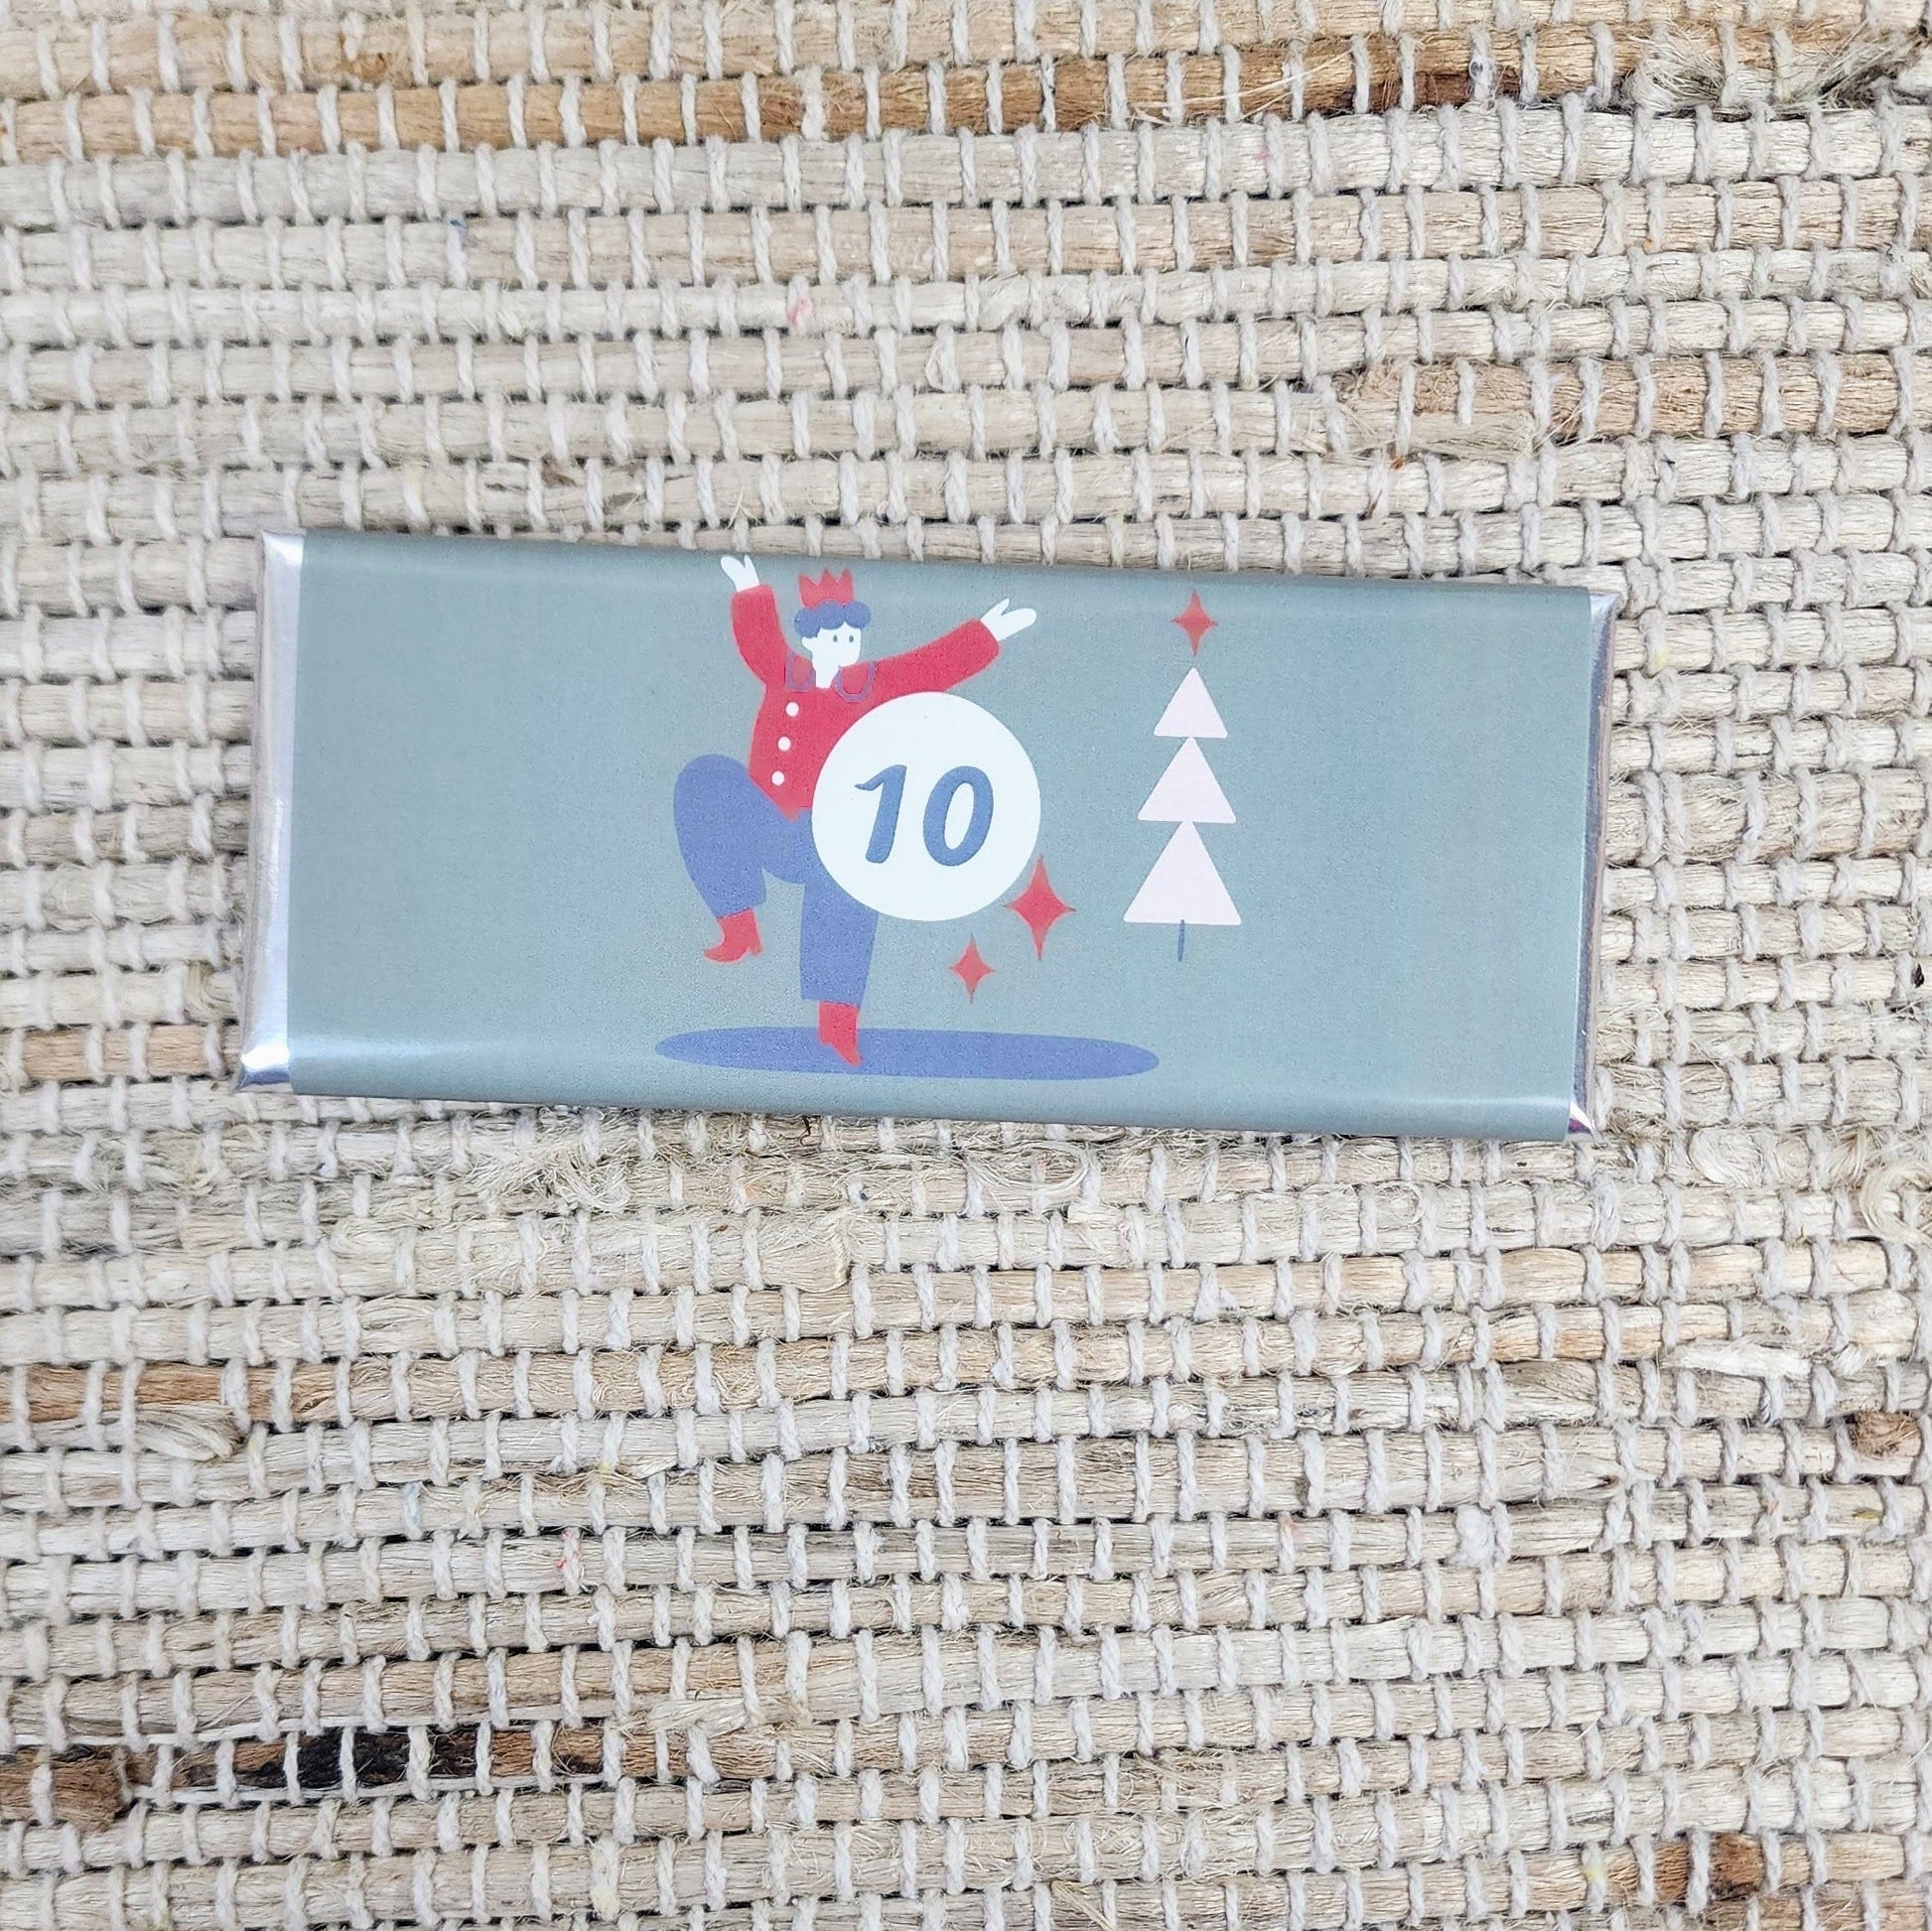 12 days of Christmas Advent Countdown Candy Bar Wrapper - 12 designs 12 days of Christmas Advent Countdown Candy Bars - 12 wrappers & designs Candy Wrapper Store